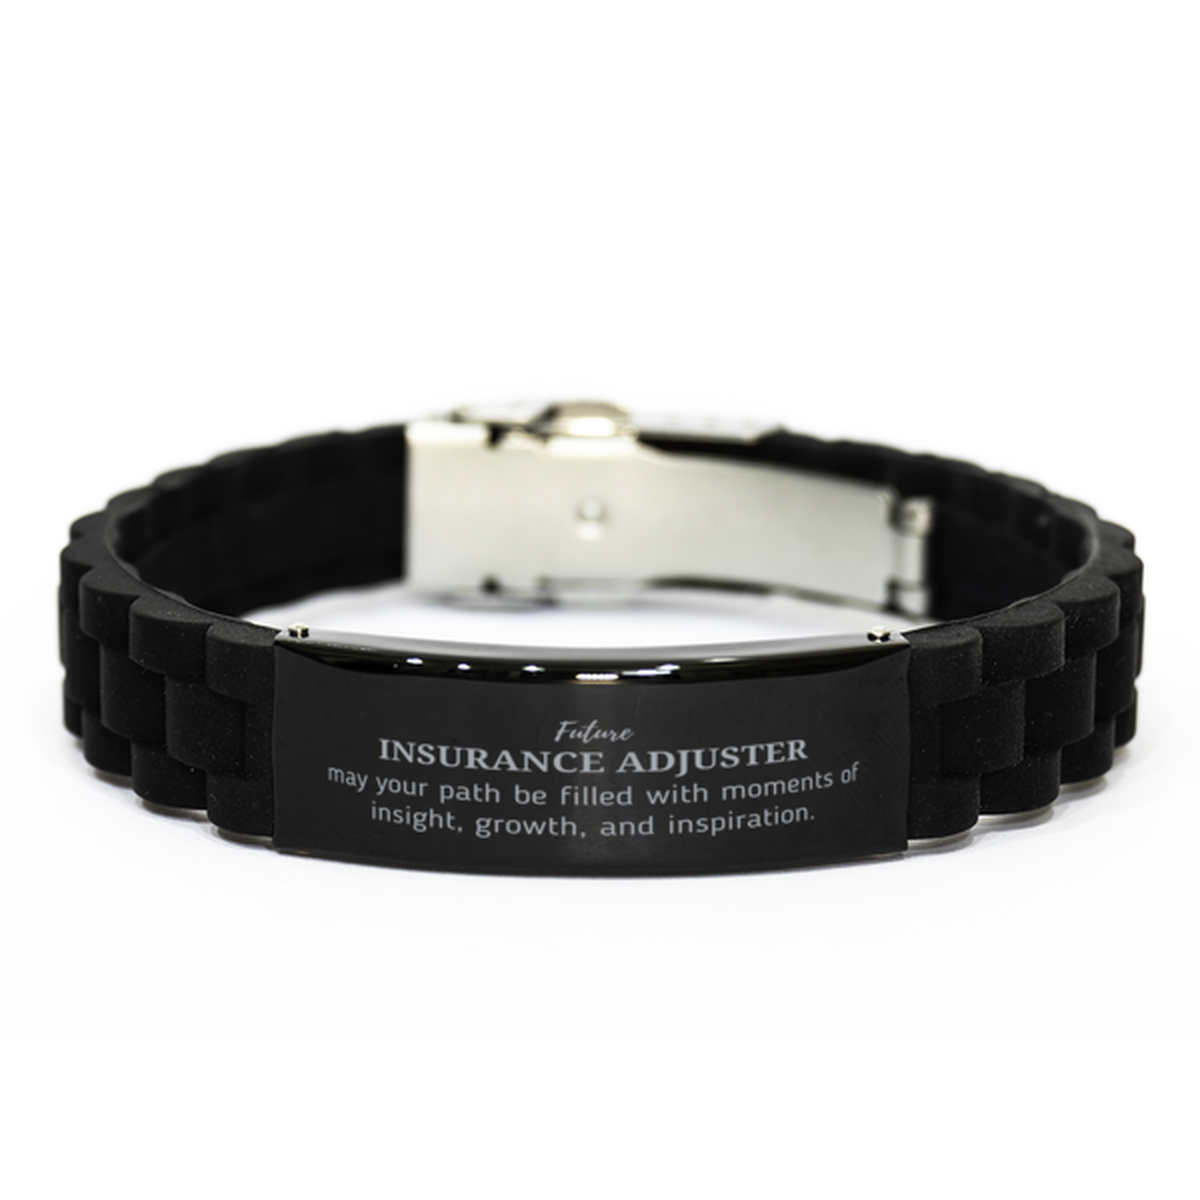 Future Insurance Adjuster Gifts, May your path be filled with moments of insight, Graduation Gifts for New Insurance Adjuster, Christmas Unique Black Glidelock Clasp Bracelet For Men, Women, Friends